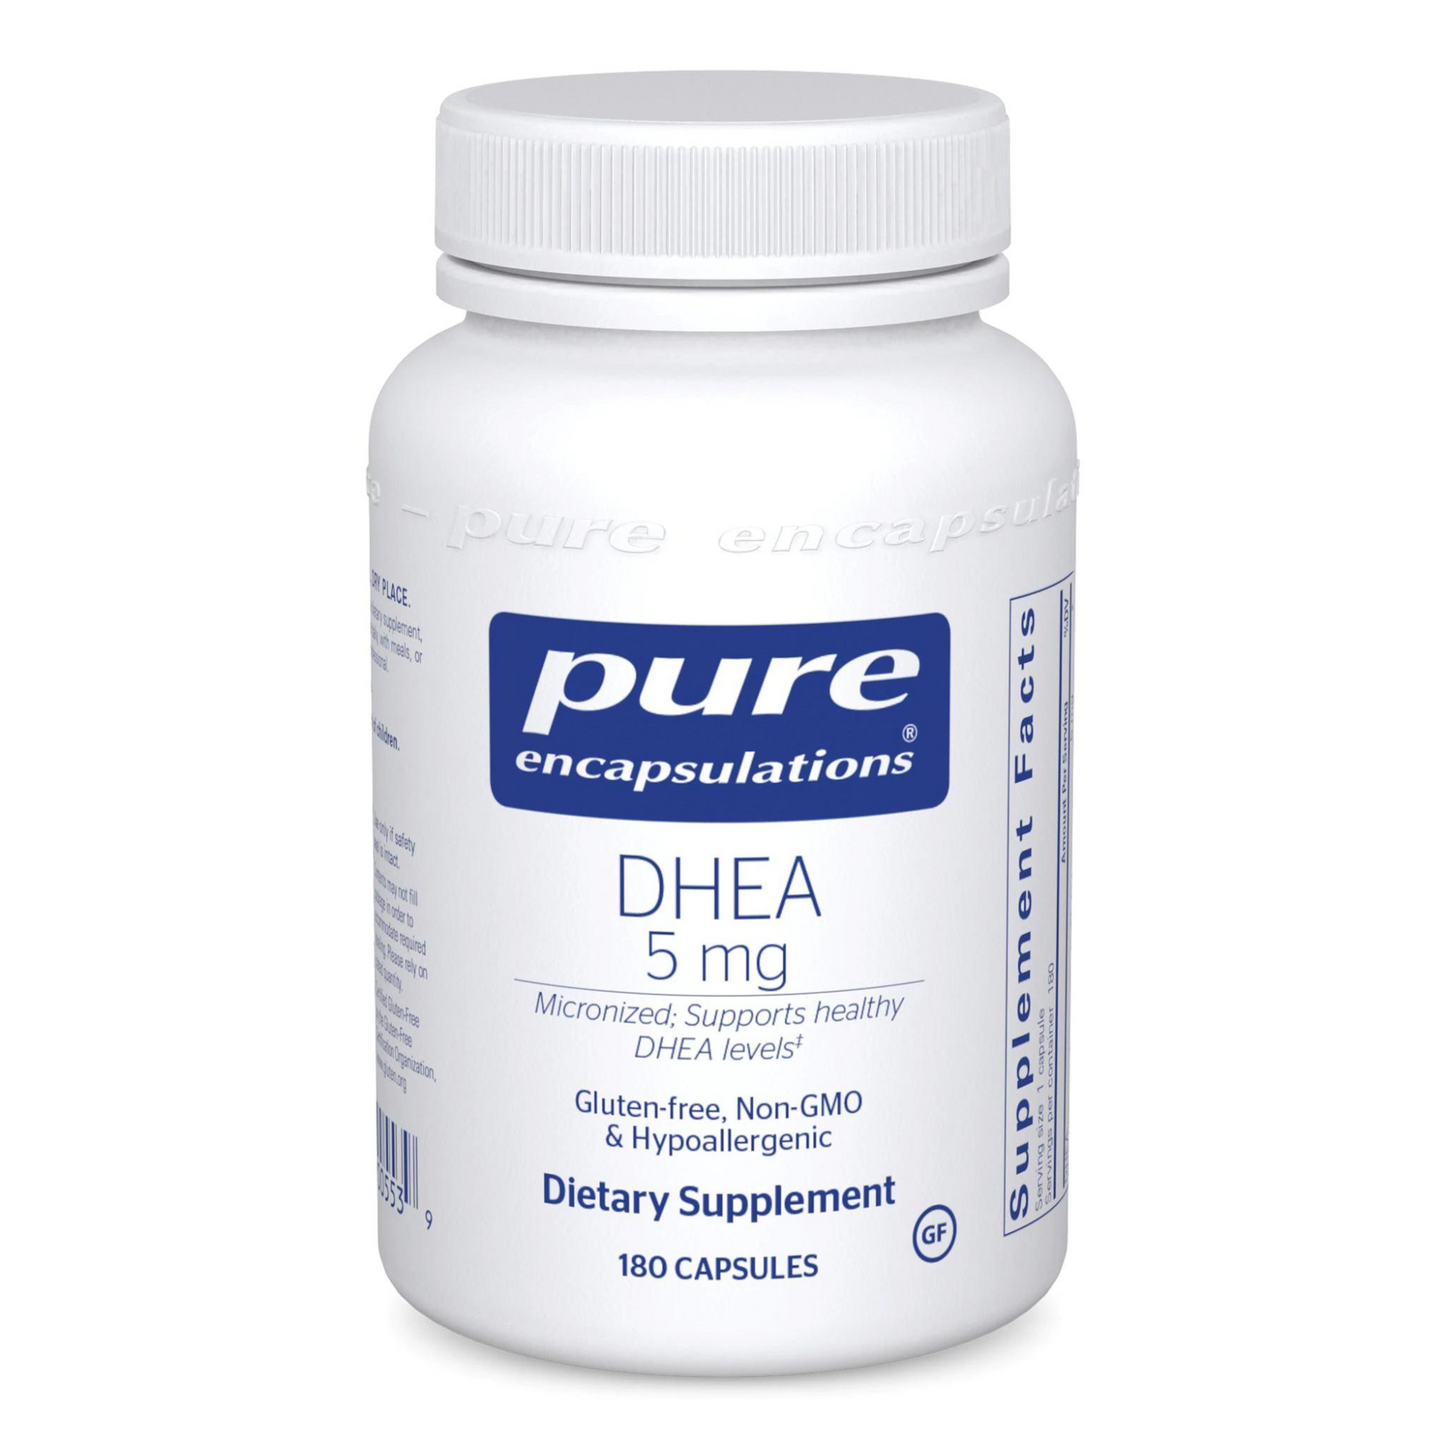 Primary Image of DHEA 5 mg. Capsules (180 count)